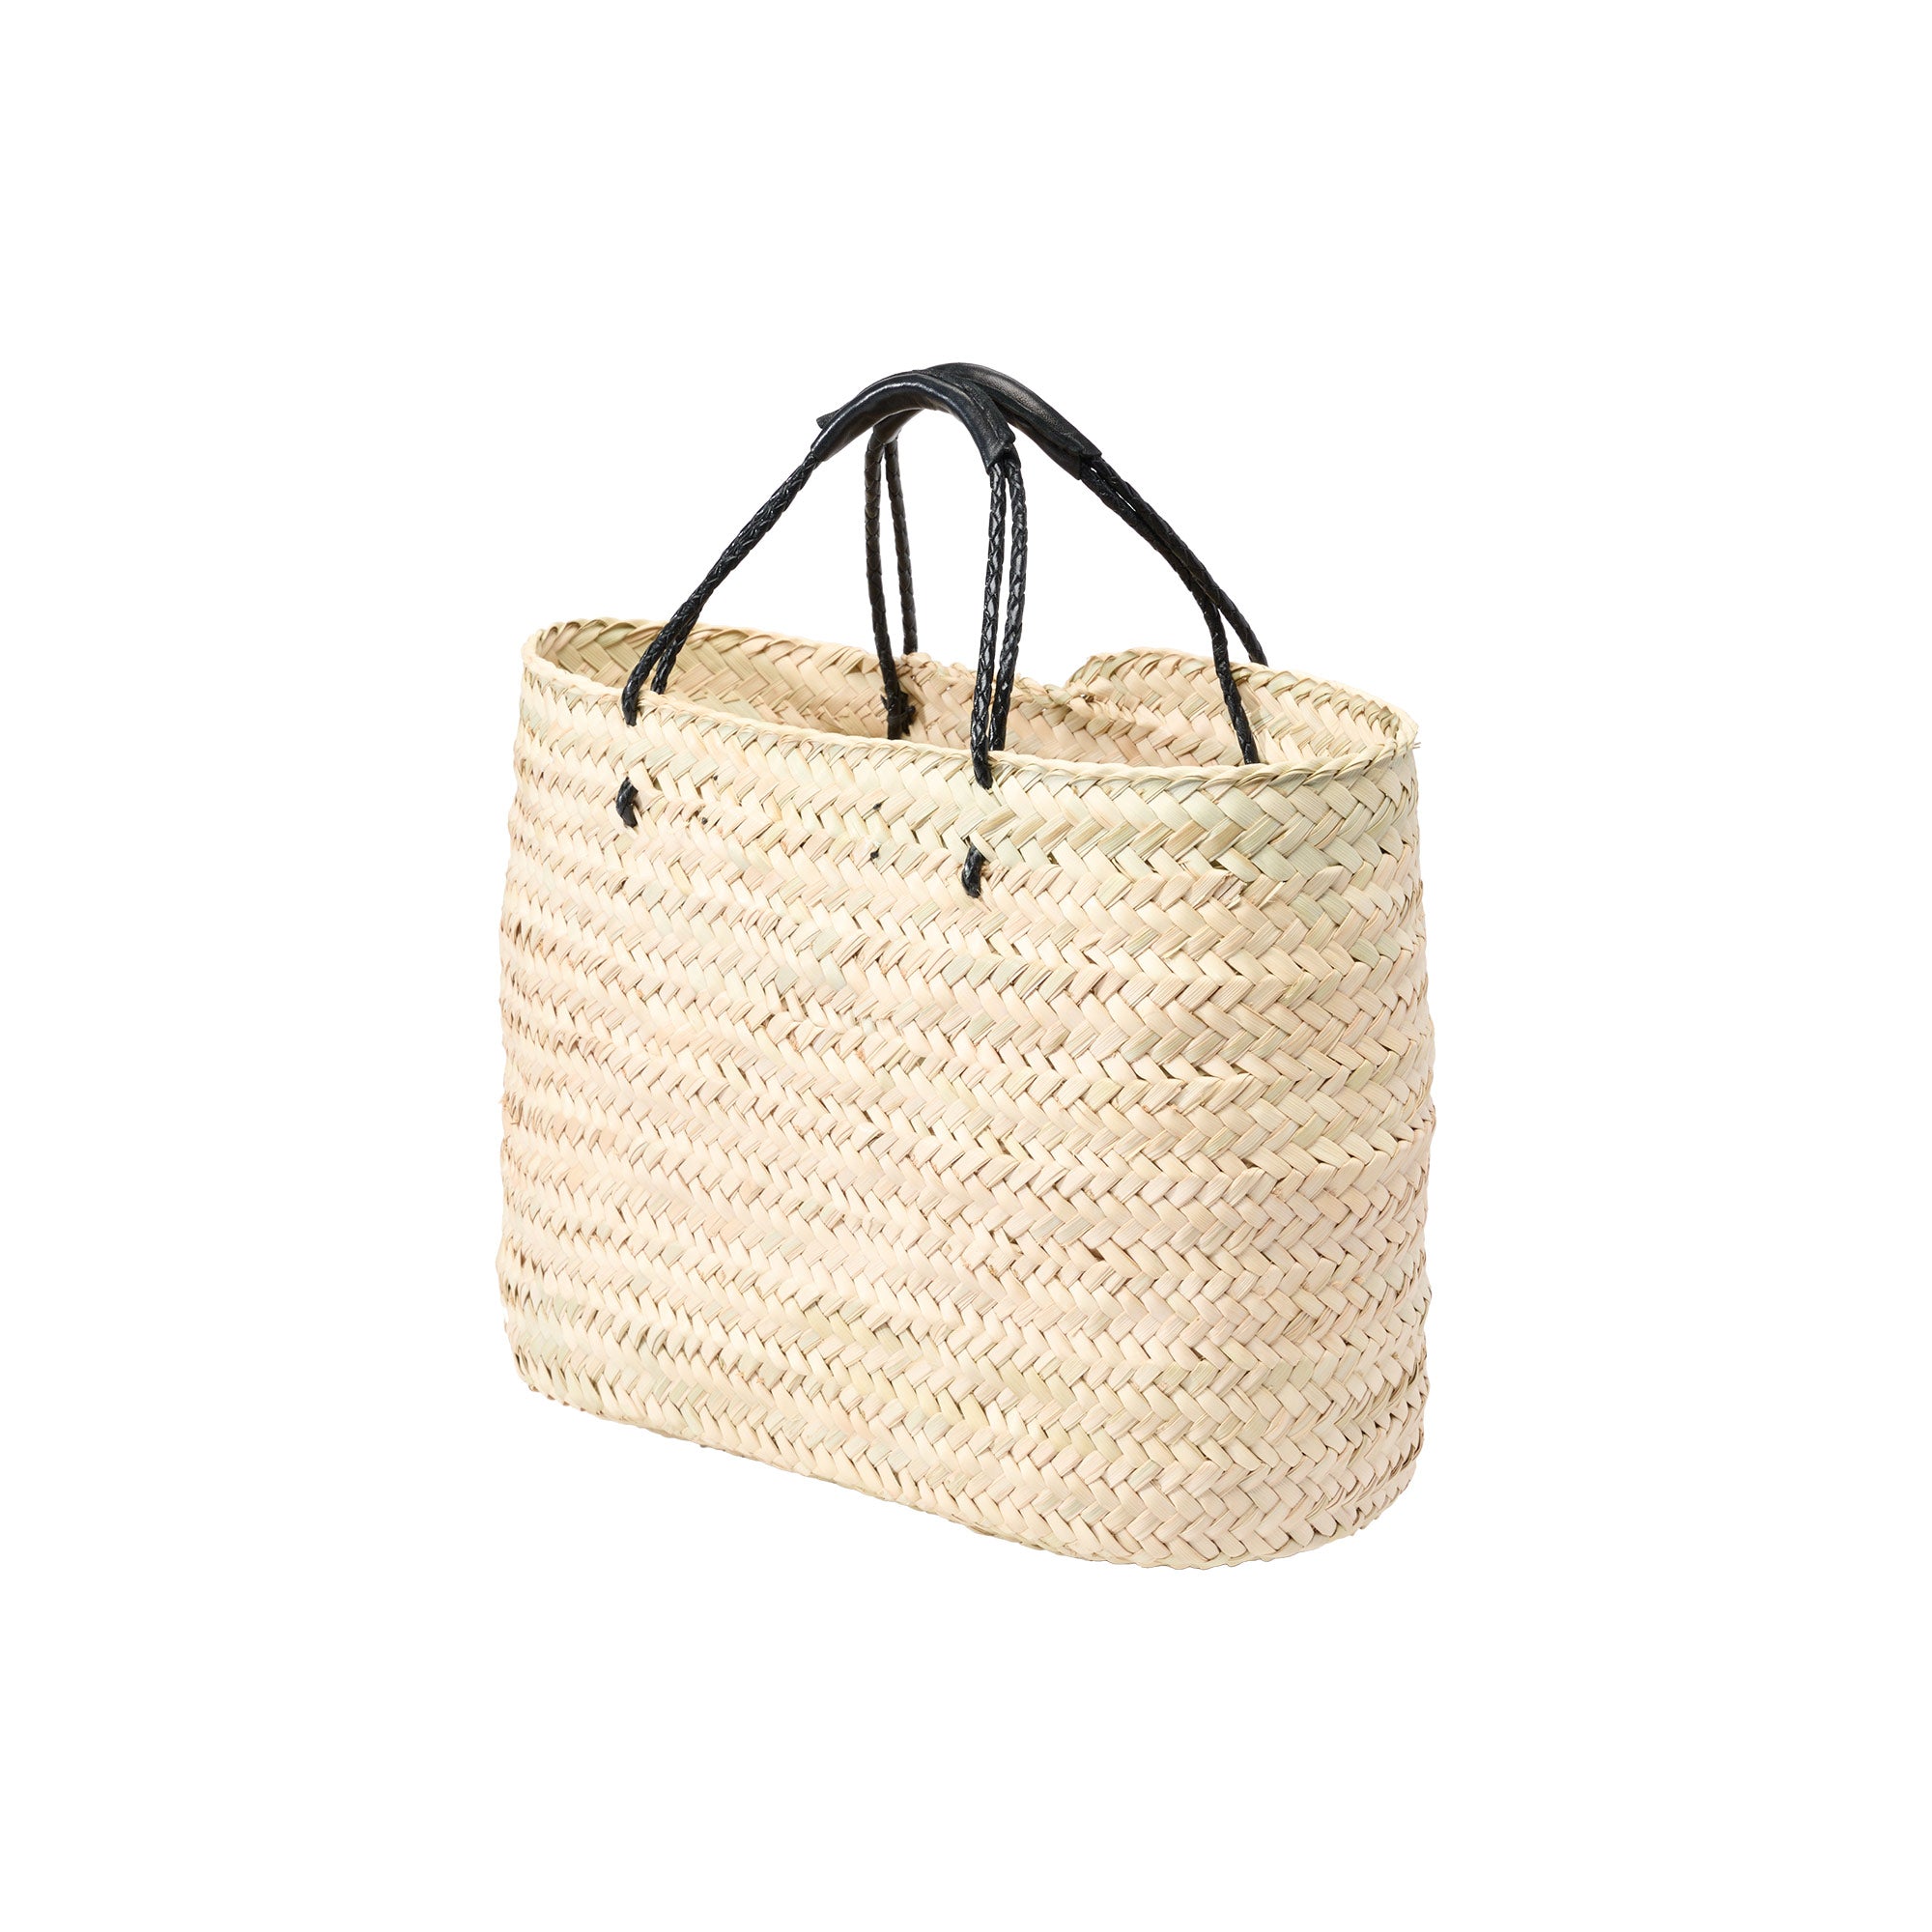 Moroccan-basket-tote-with-leather-handles-black-side